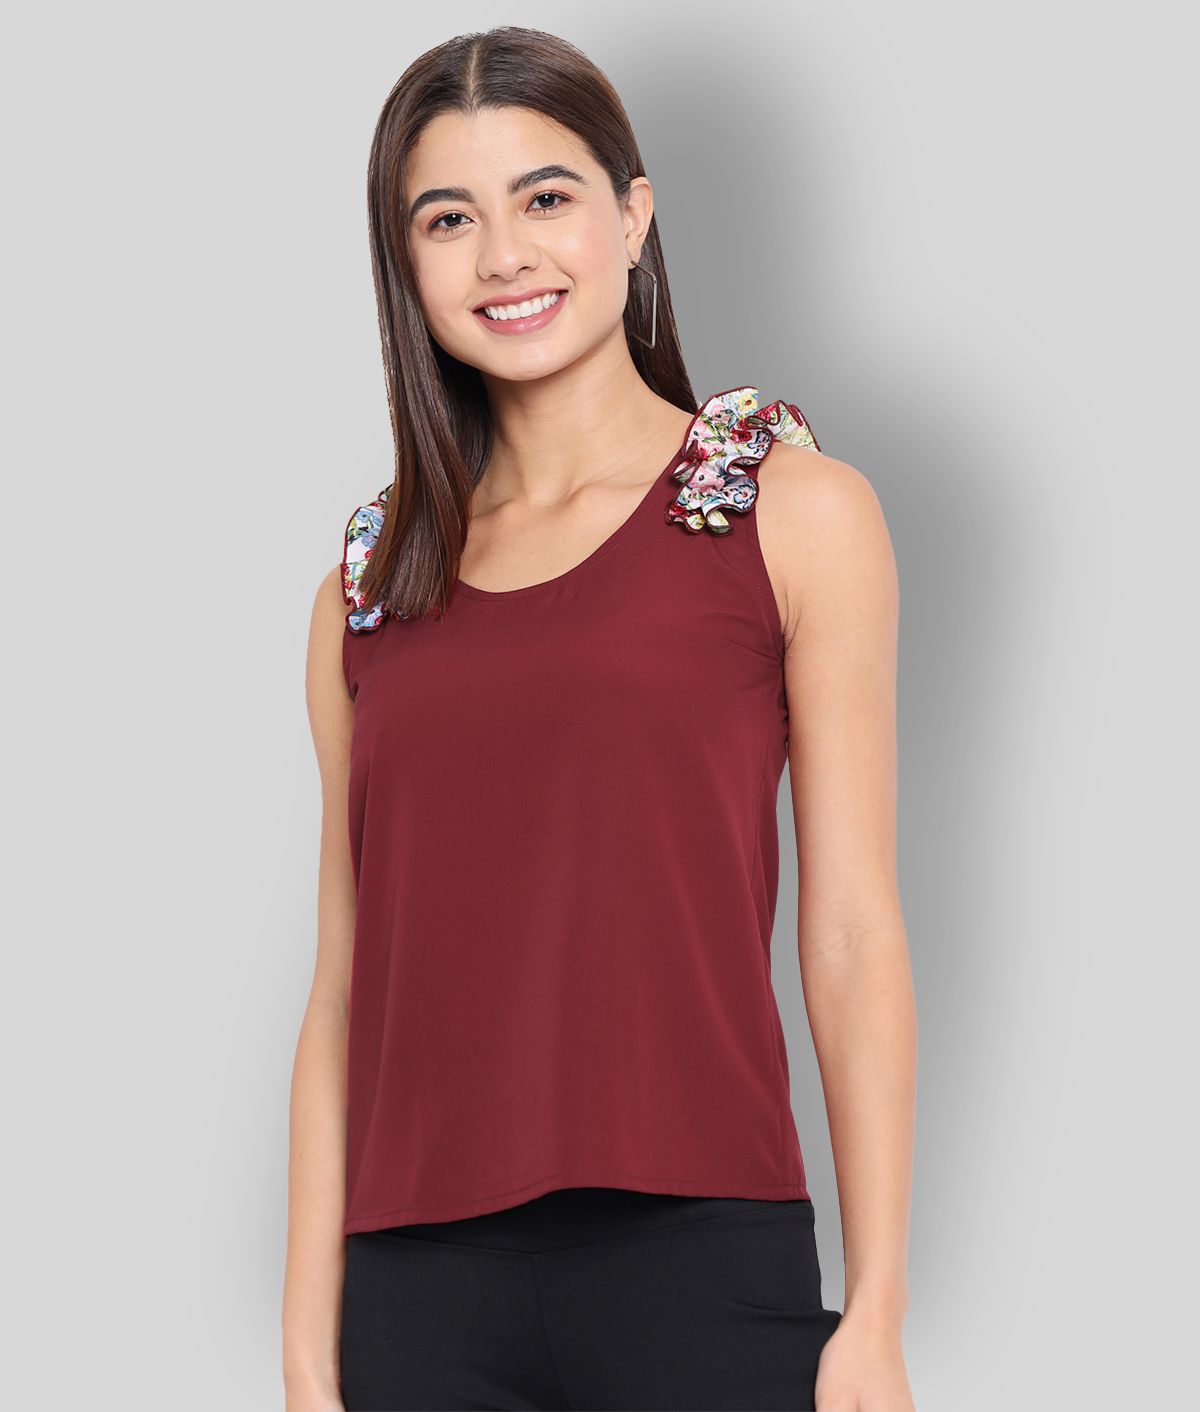     			ALL WAYS YOU - Maroon Polyester Women's Regular Top ( Pack of 1 )